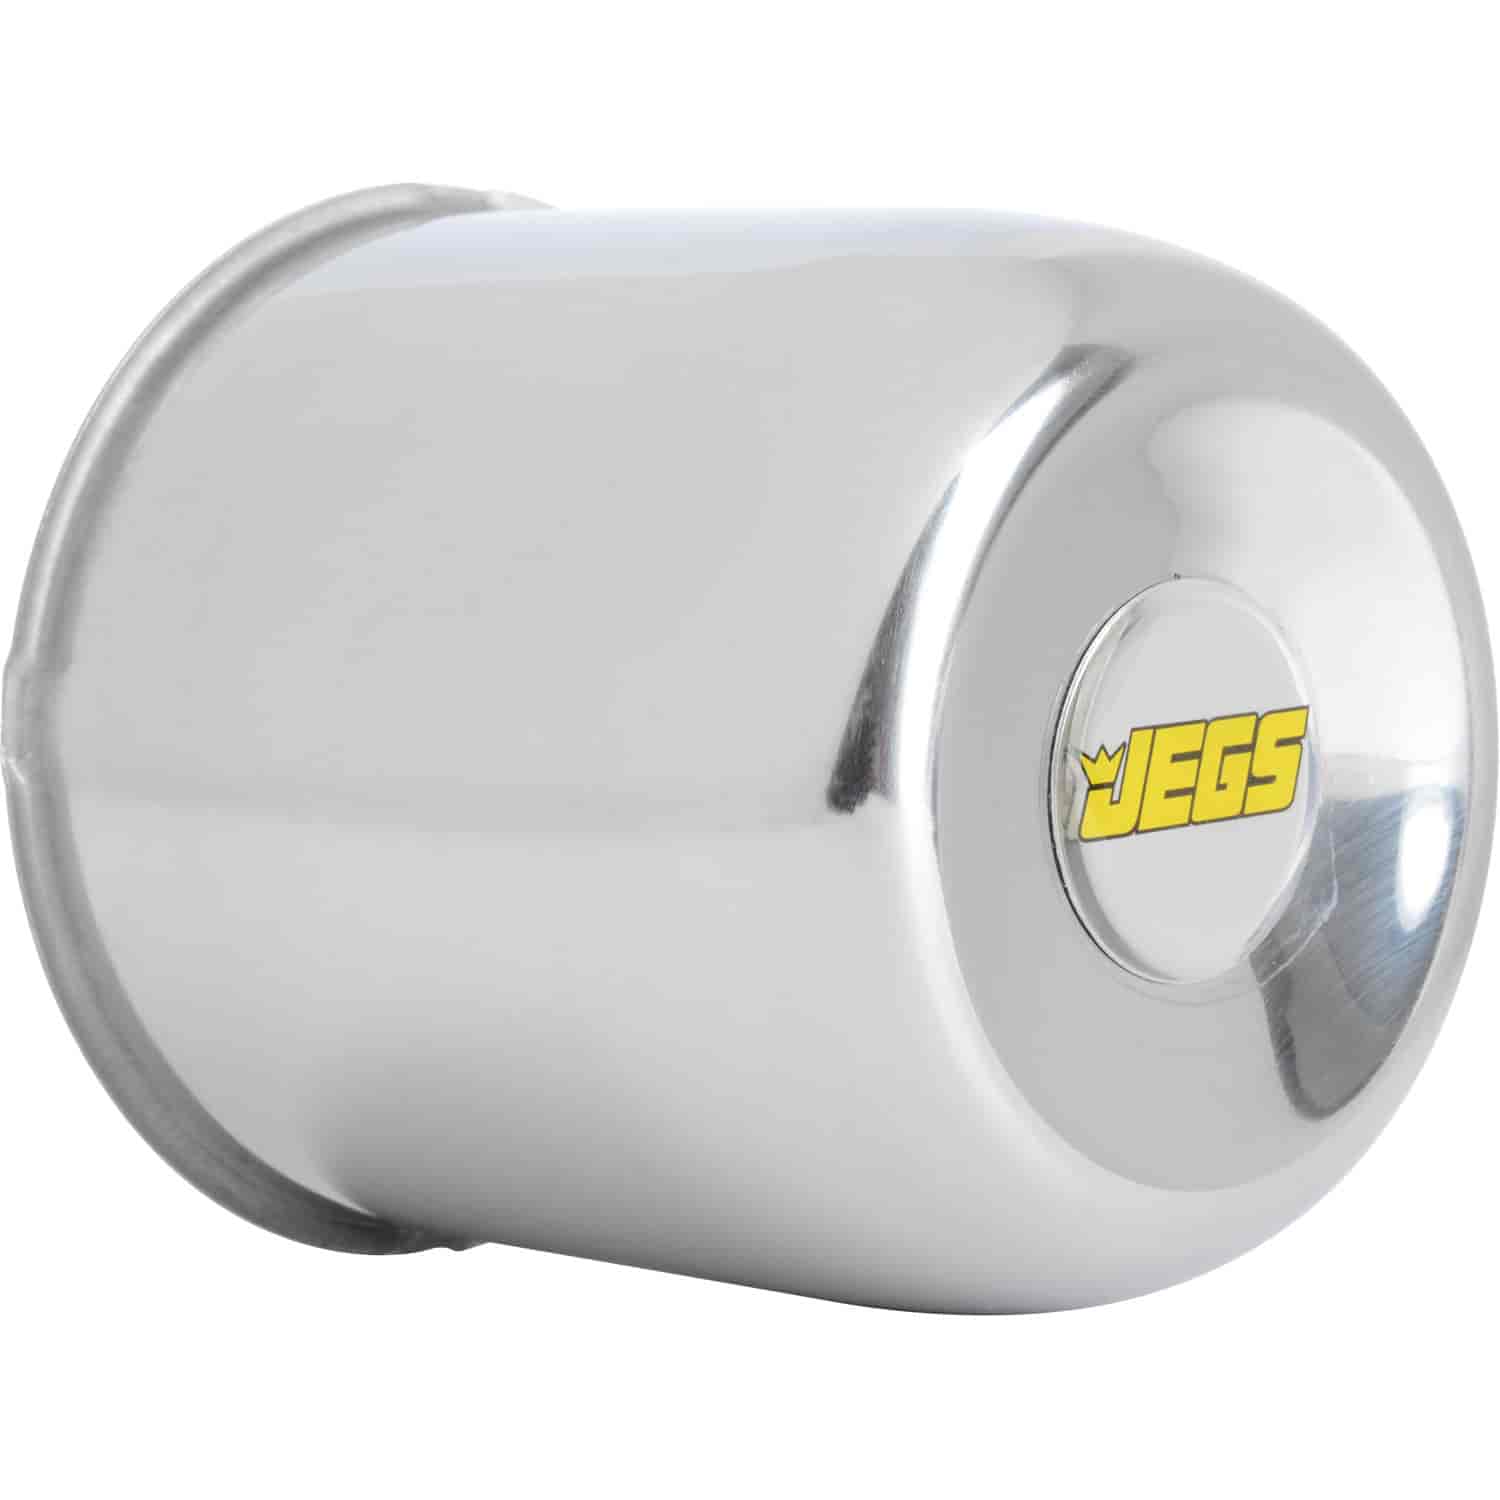 JEGS Logo Center Cap Fits 4.25 in. Bore